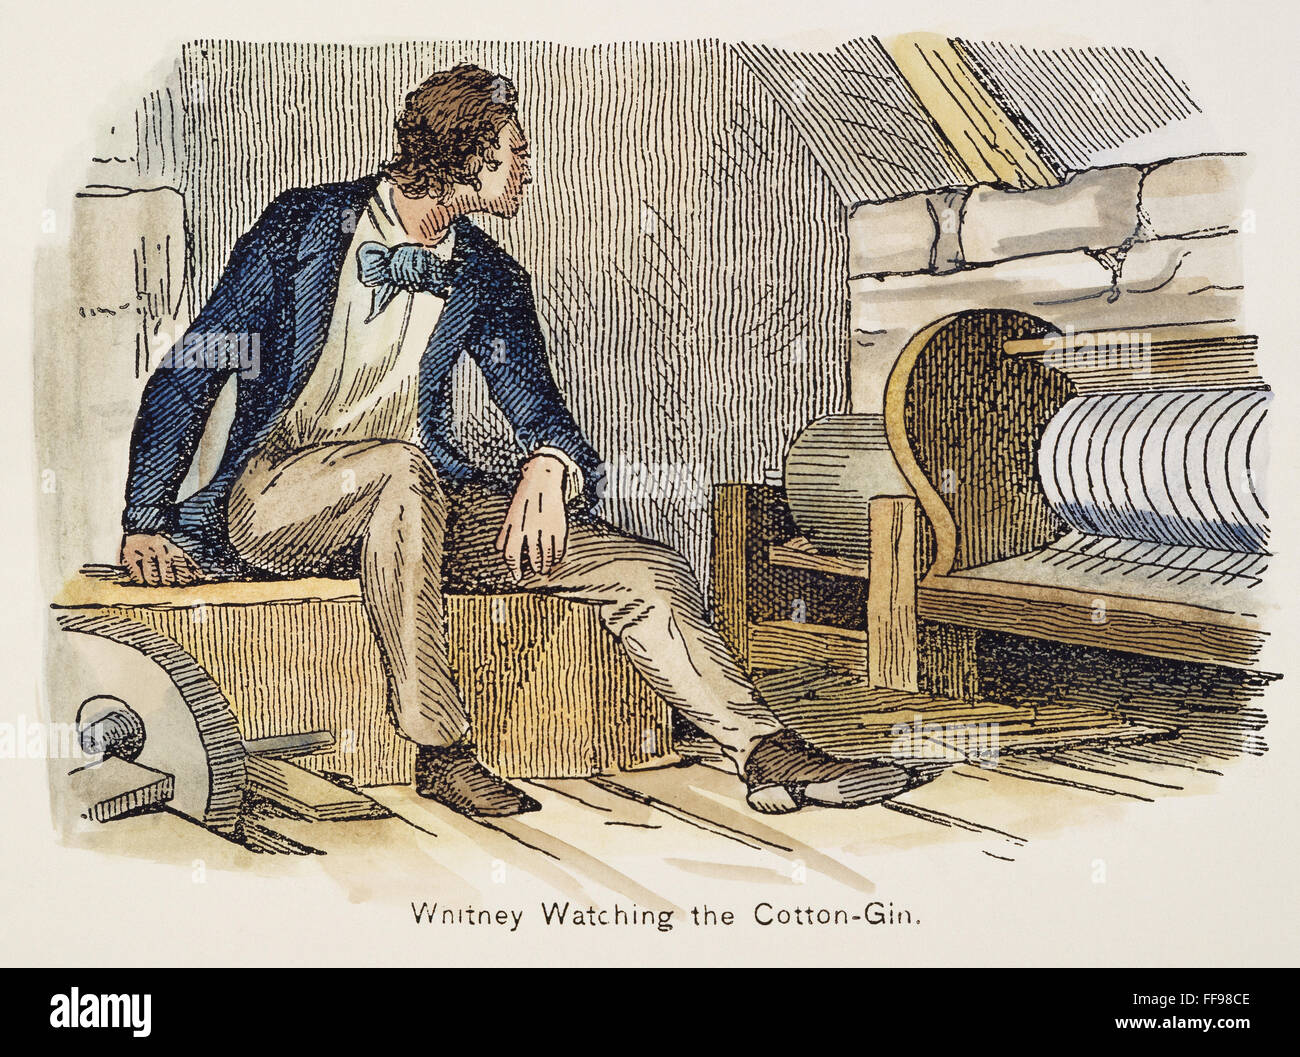 ELI WHITNEY (1765-1825). /nAmerican inventor. Watching his cotton gin: 19th century wood engraving. Stock Photo